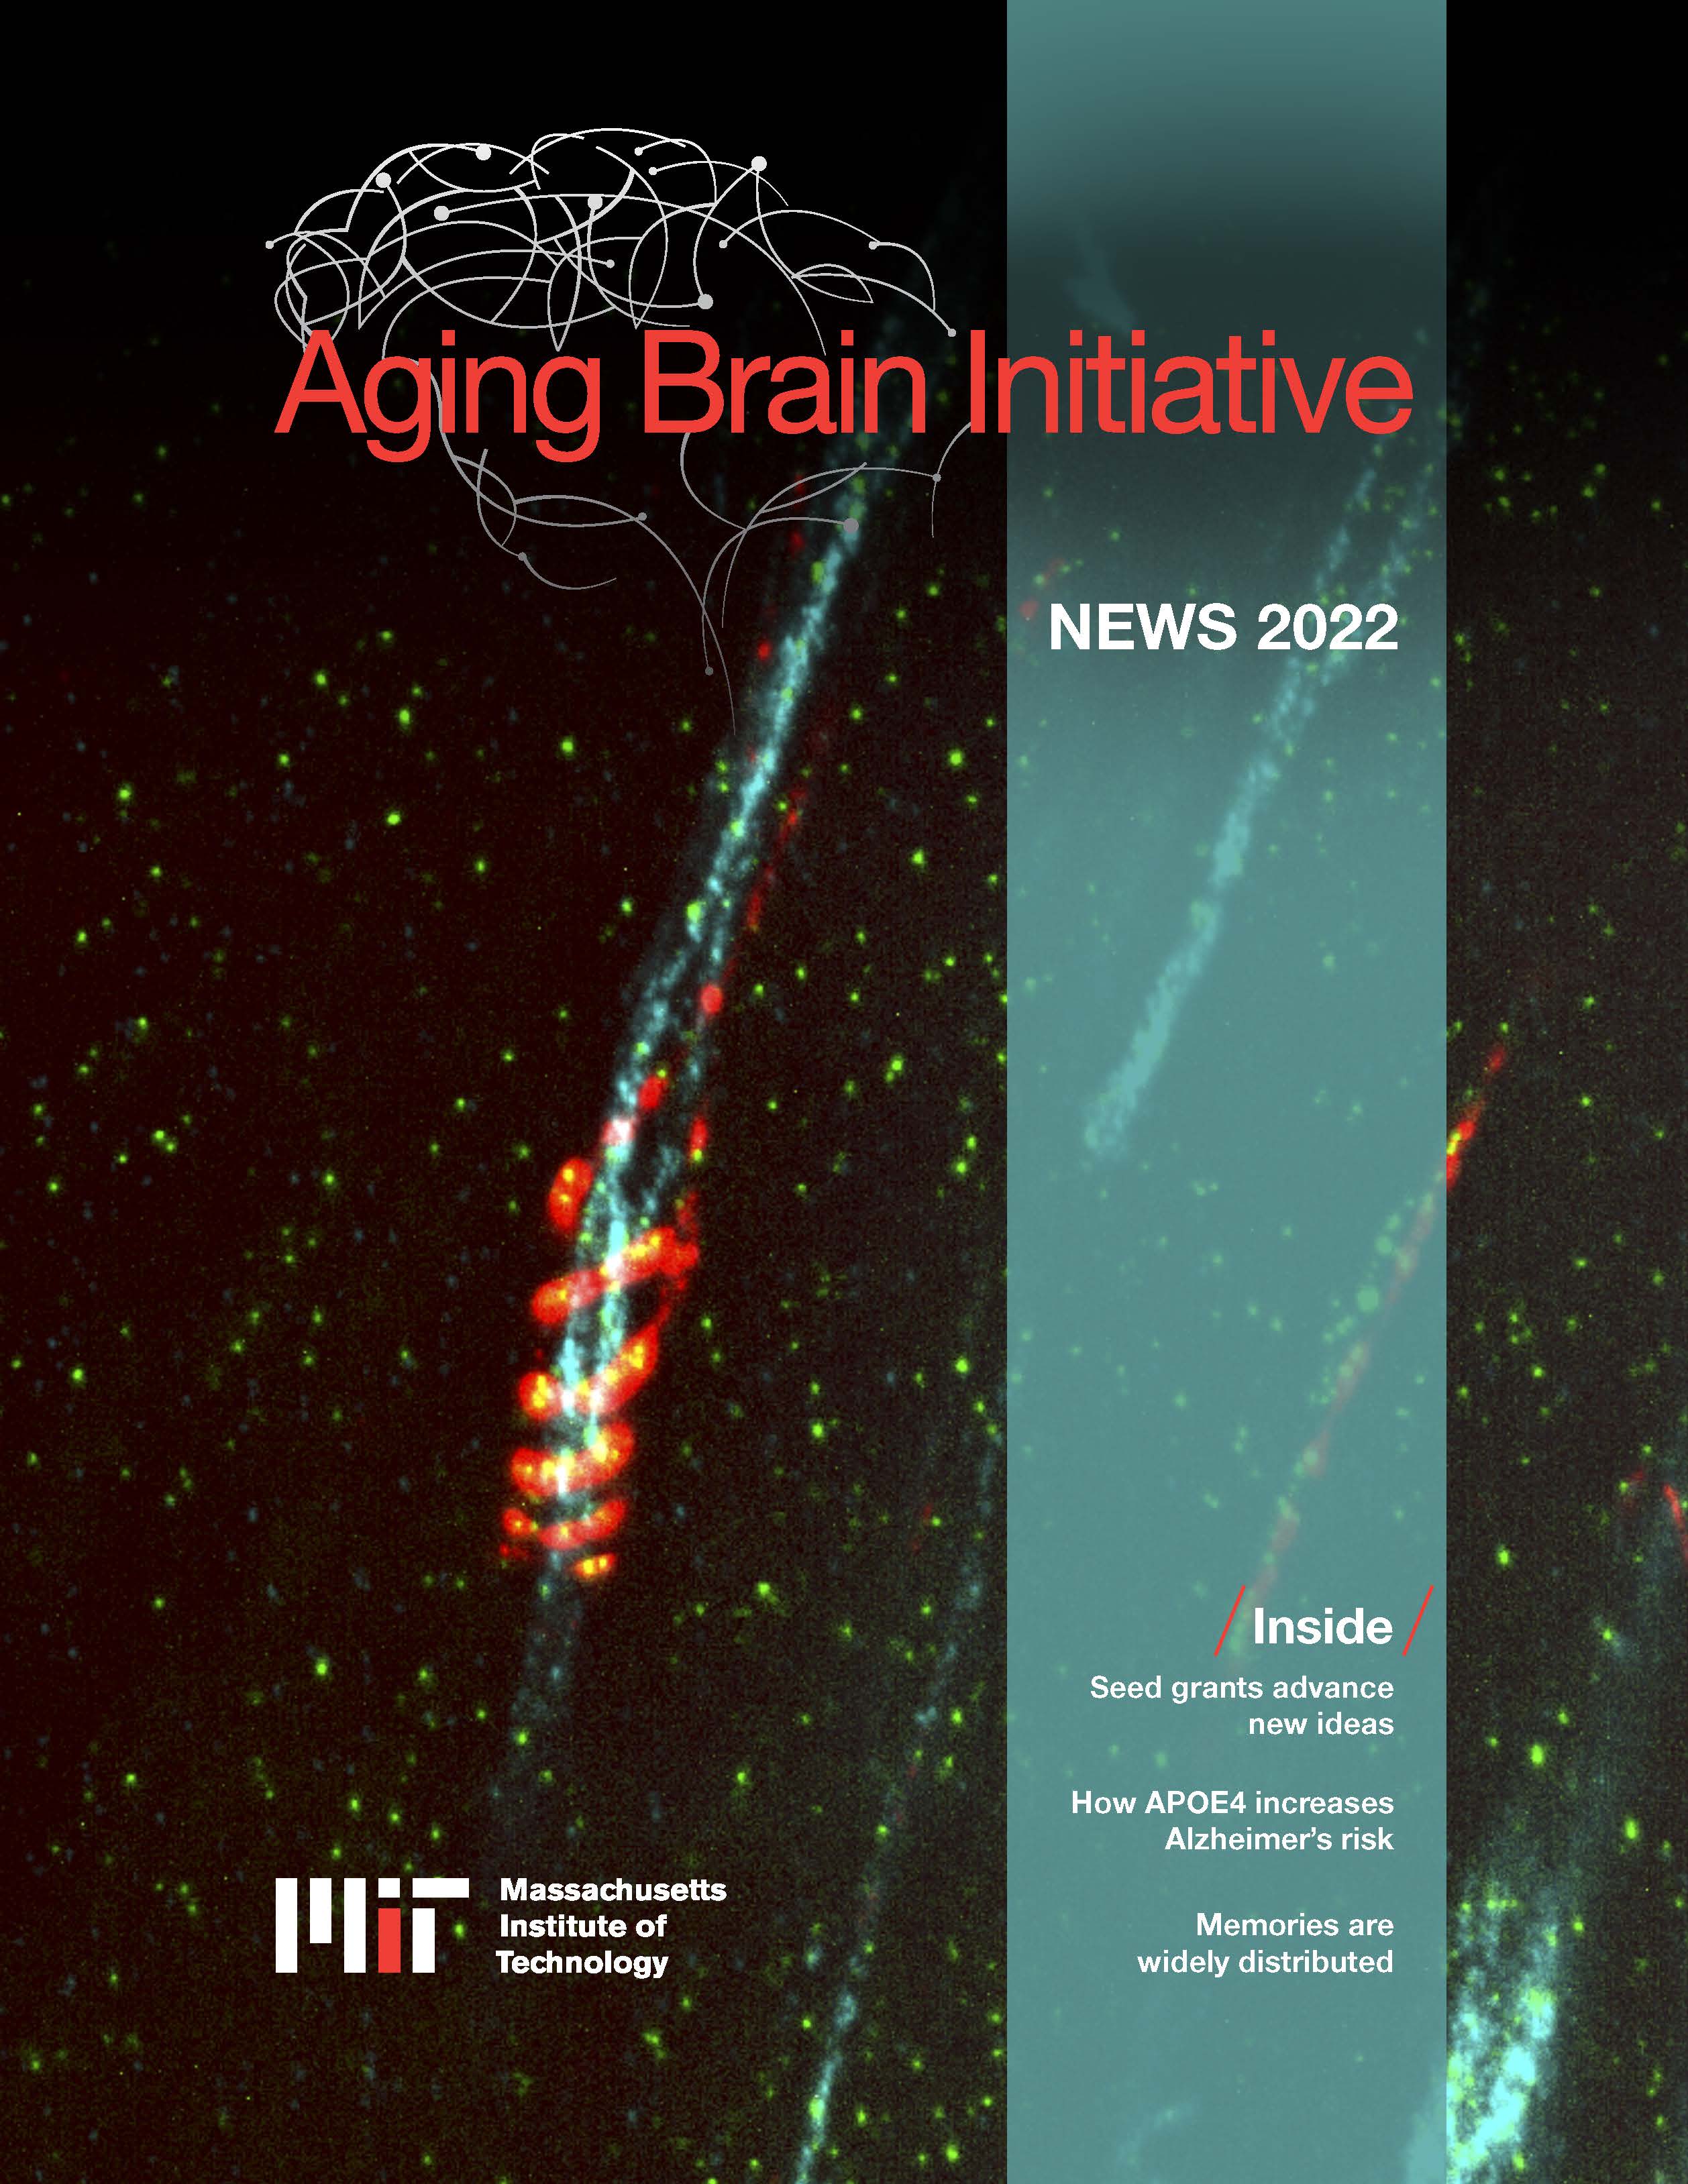 The cover of the 2022 Aging Brain Initiative News features a black field with many red dots. Featured in the foregound is a white streak with a red and yellow coil around it.